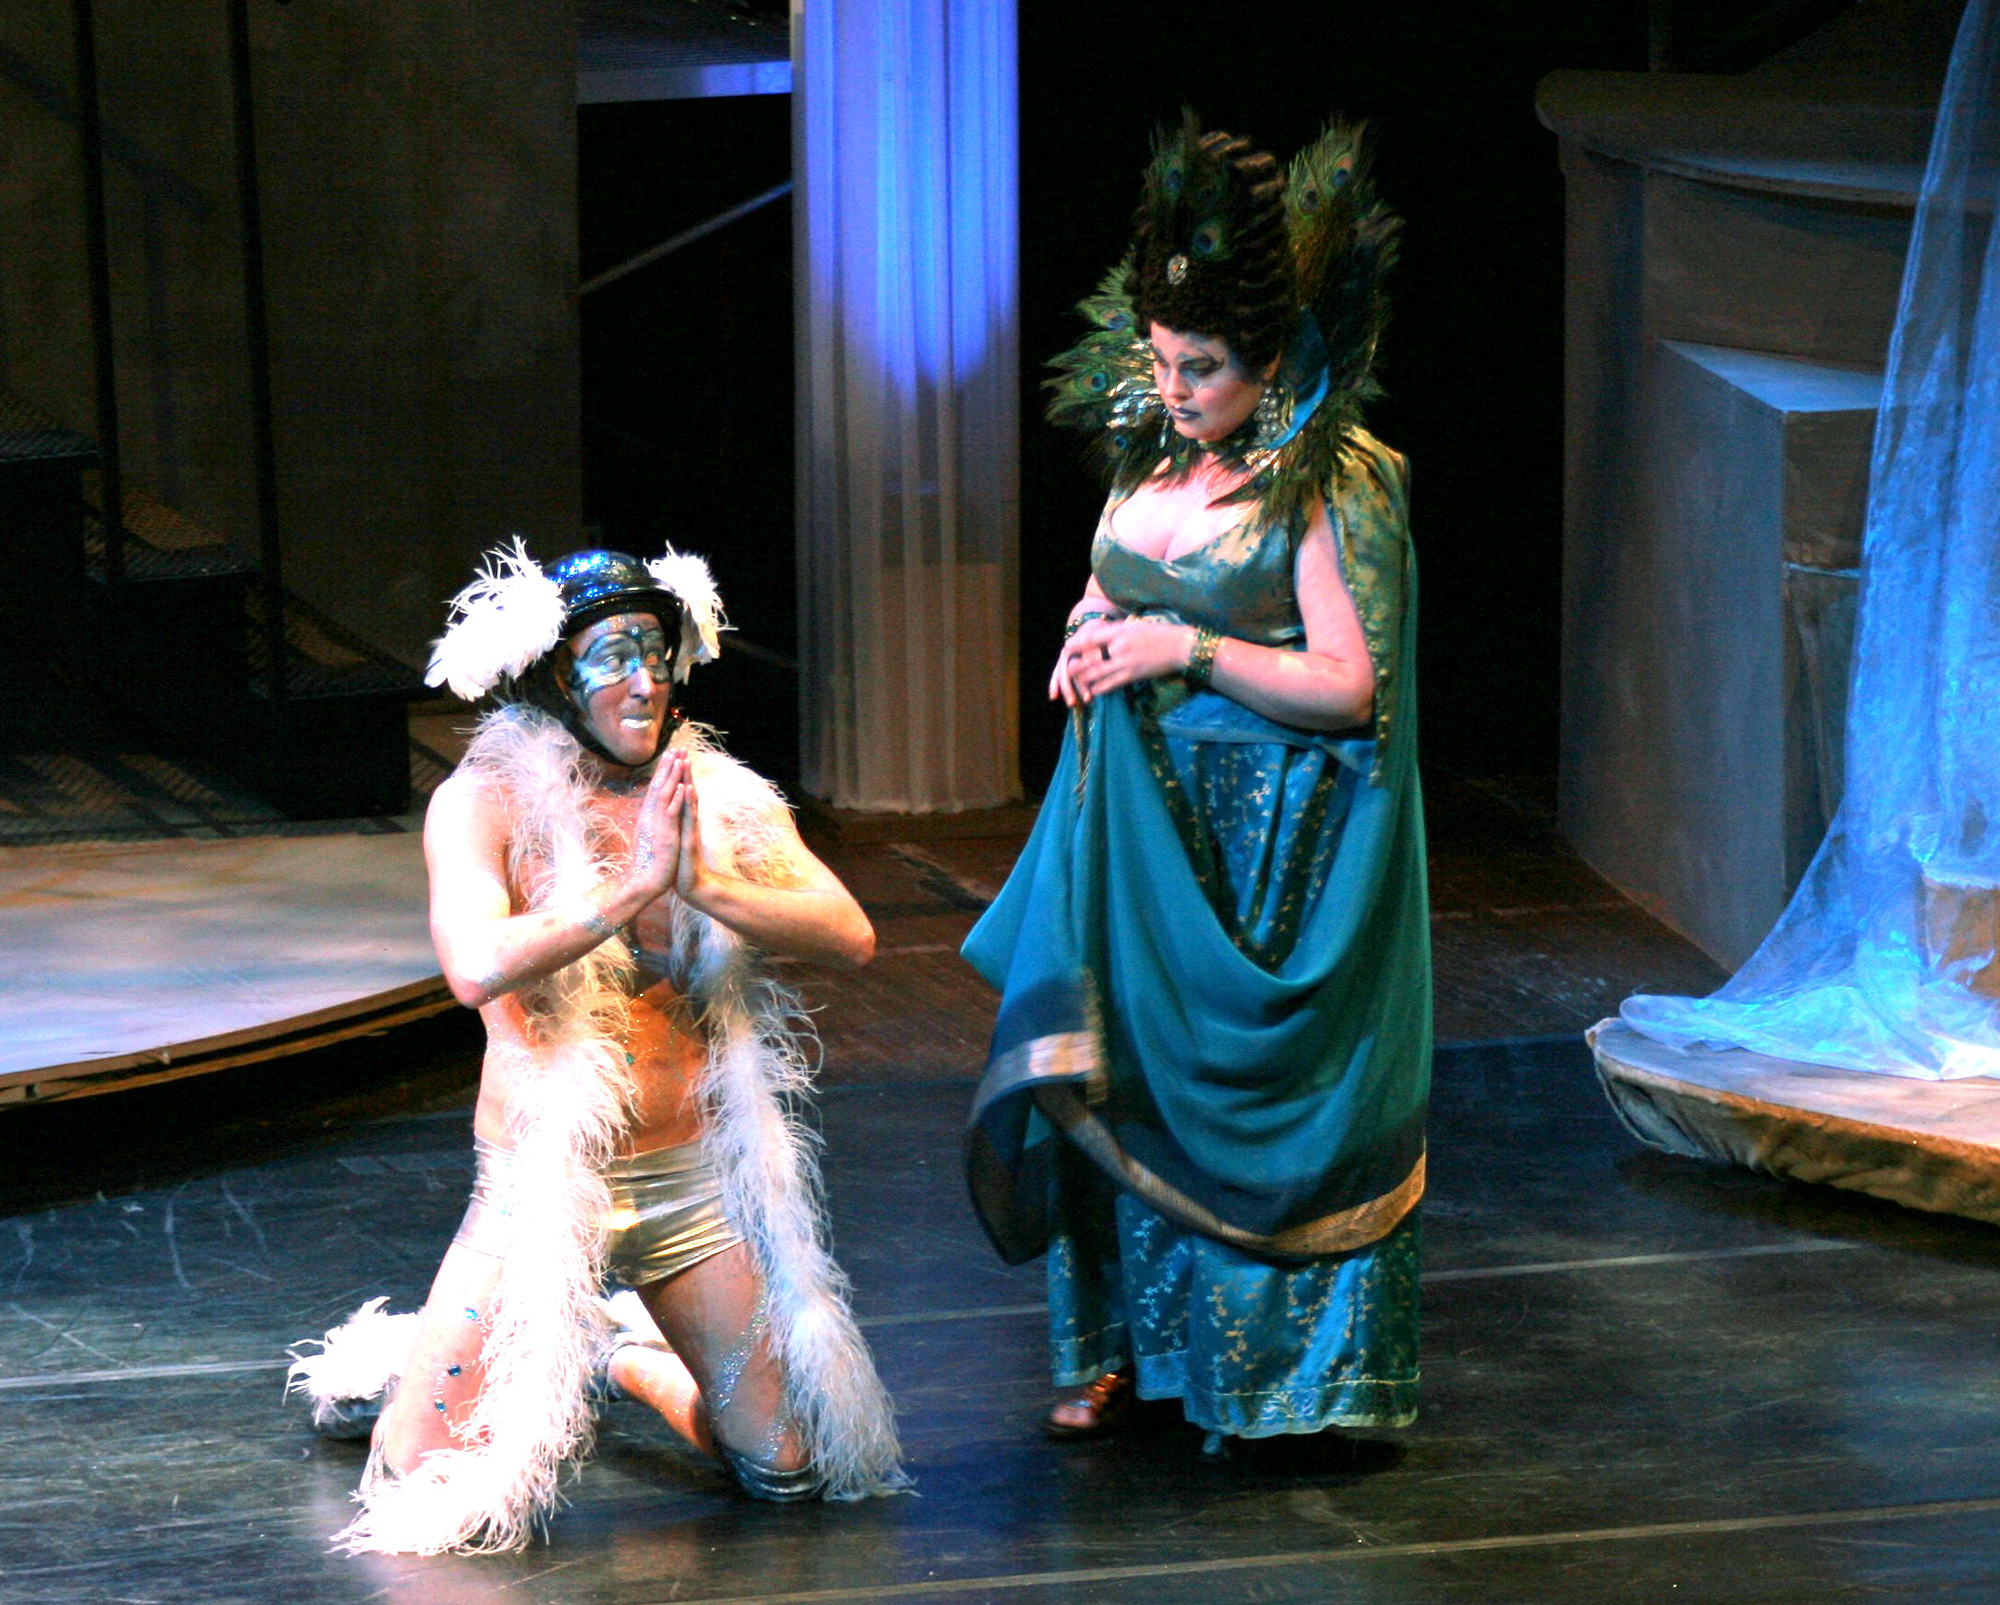 Todd Walters as Mercury in WSU Opera and Musical Theatre's production of &amp;amp;amp;amp;amp;amp;amp;amp;amp;amp;amp;amp;quot;La Calisto.&amp;amp;amp;amp;amp;amp;amp;amp;amp;amp;amp;amp;quot;